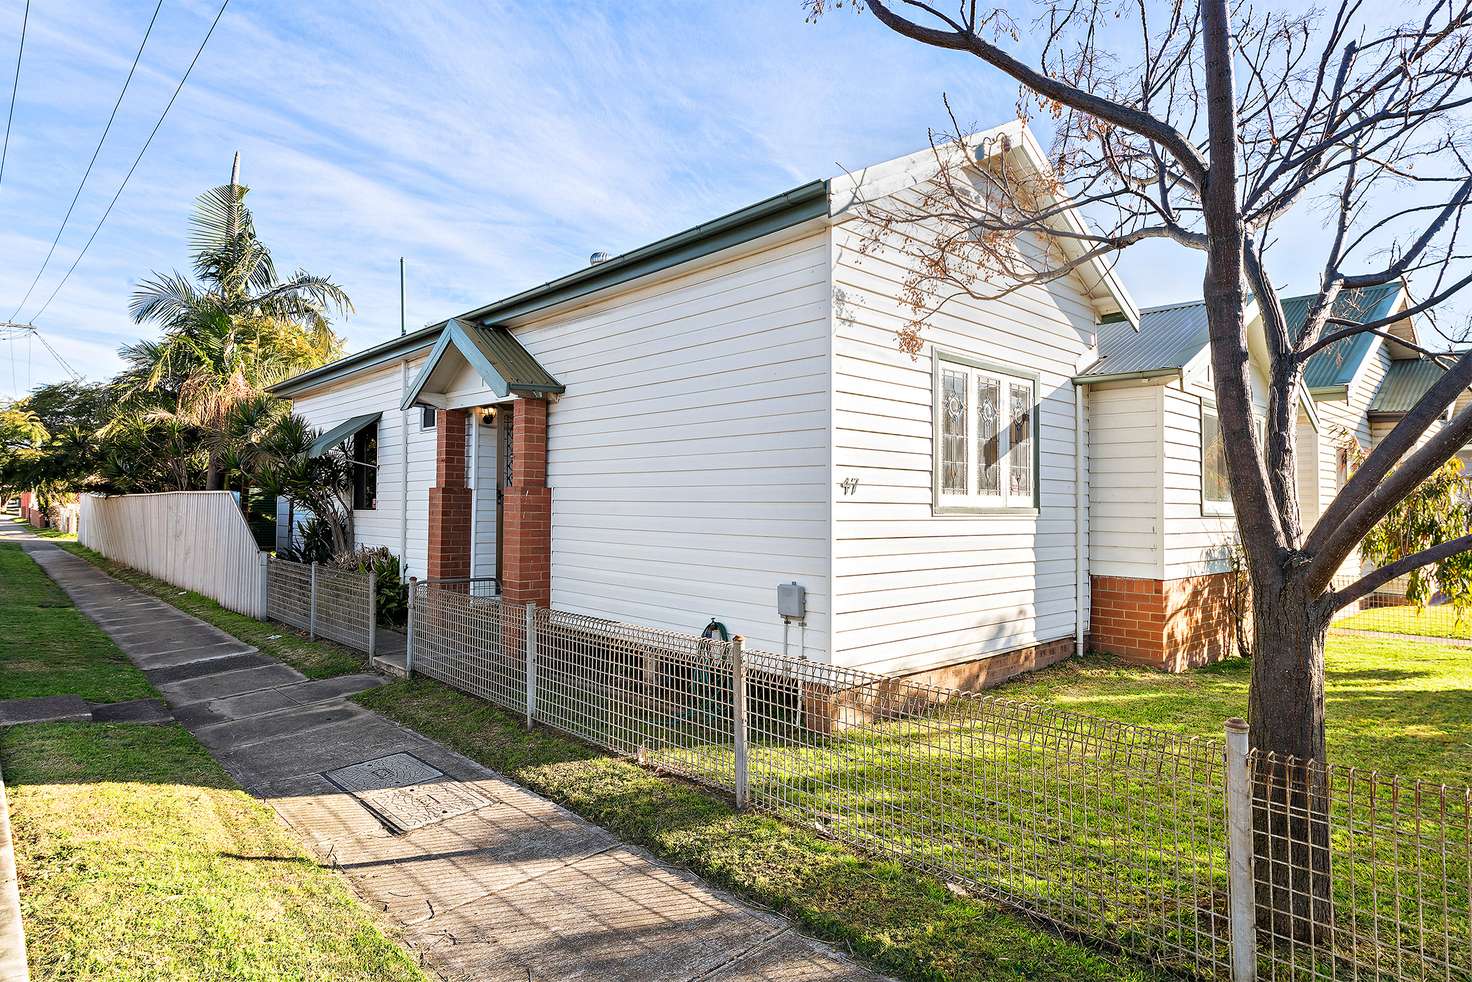 Main view of Homely house listing, 47 Braye Street, Mayfield NSW 2304